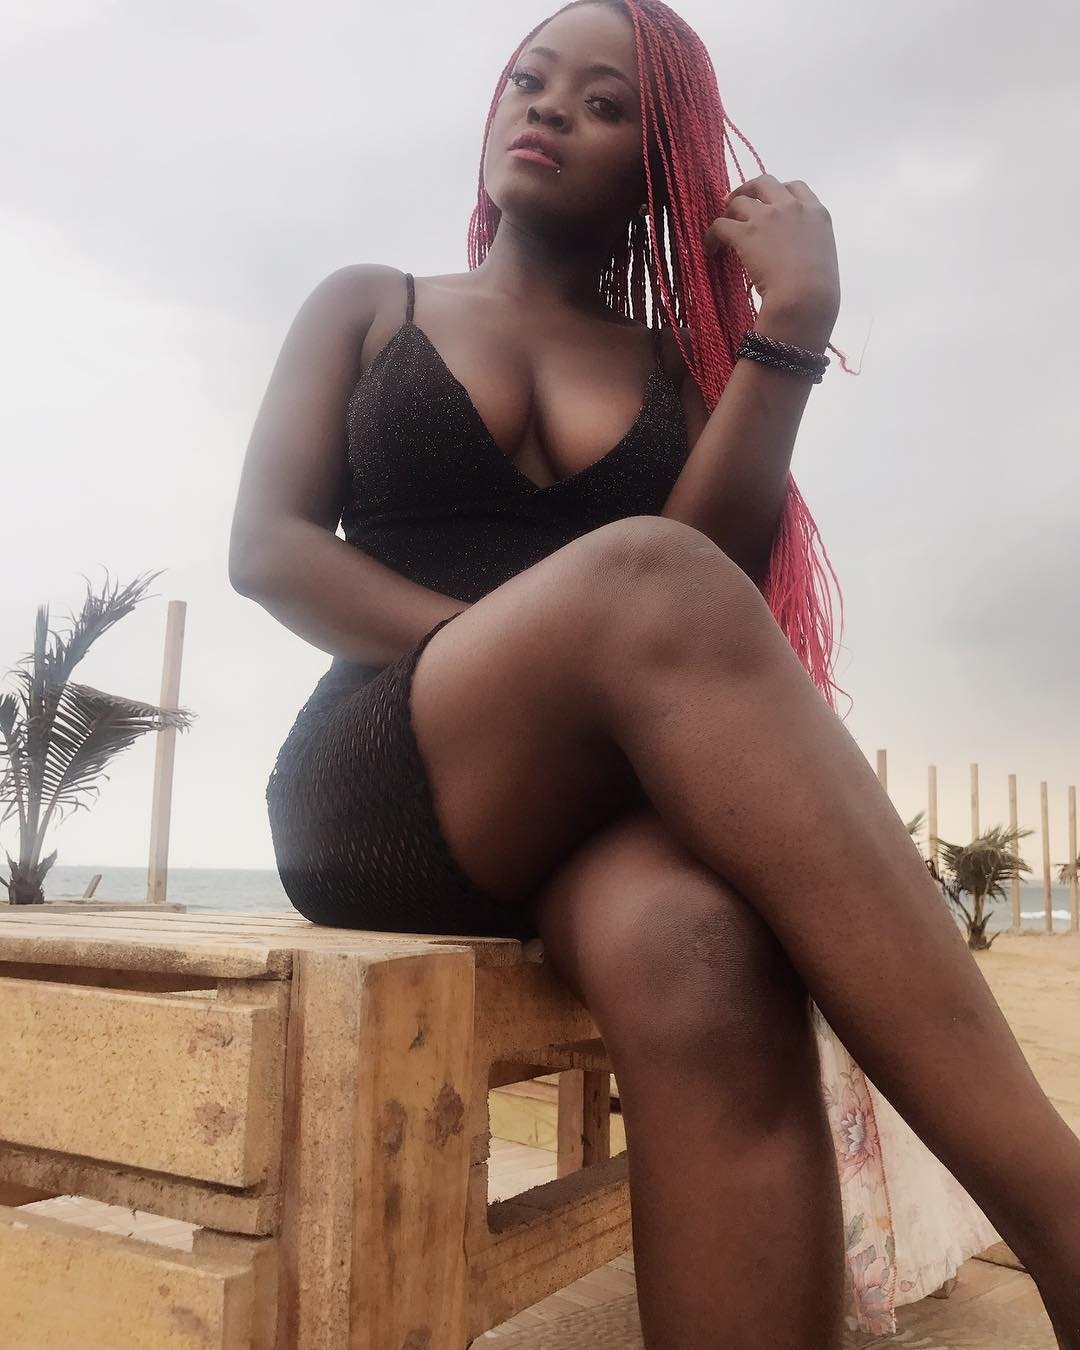 Check Out This 16 Hot Photos Of The Girl Shatta Wale Is Alleged To Be "Chopping" After Dumping Michy